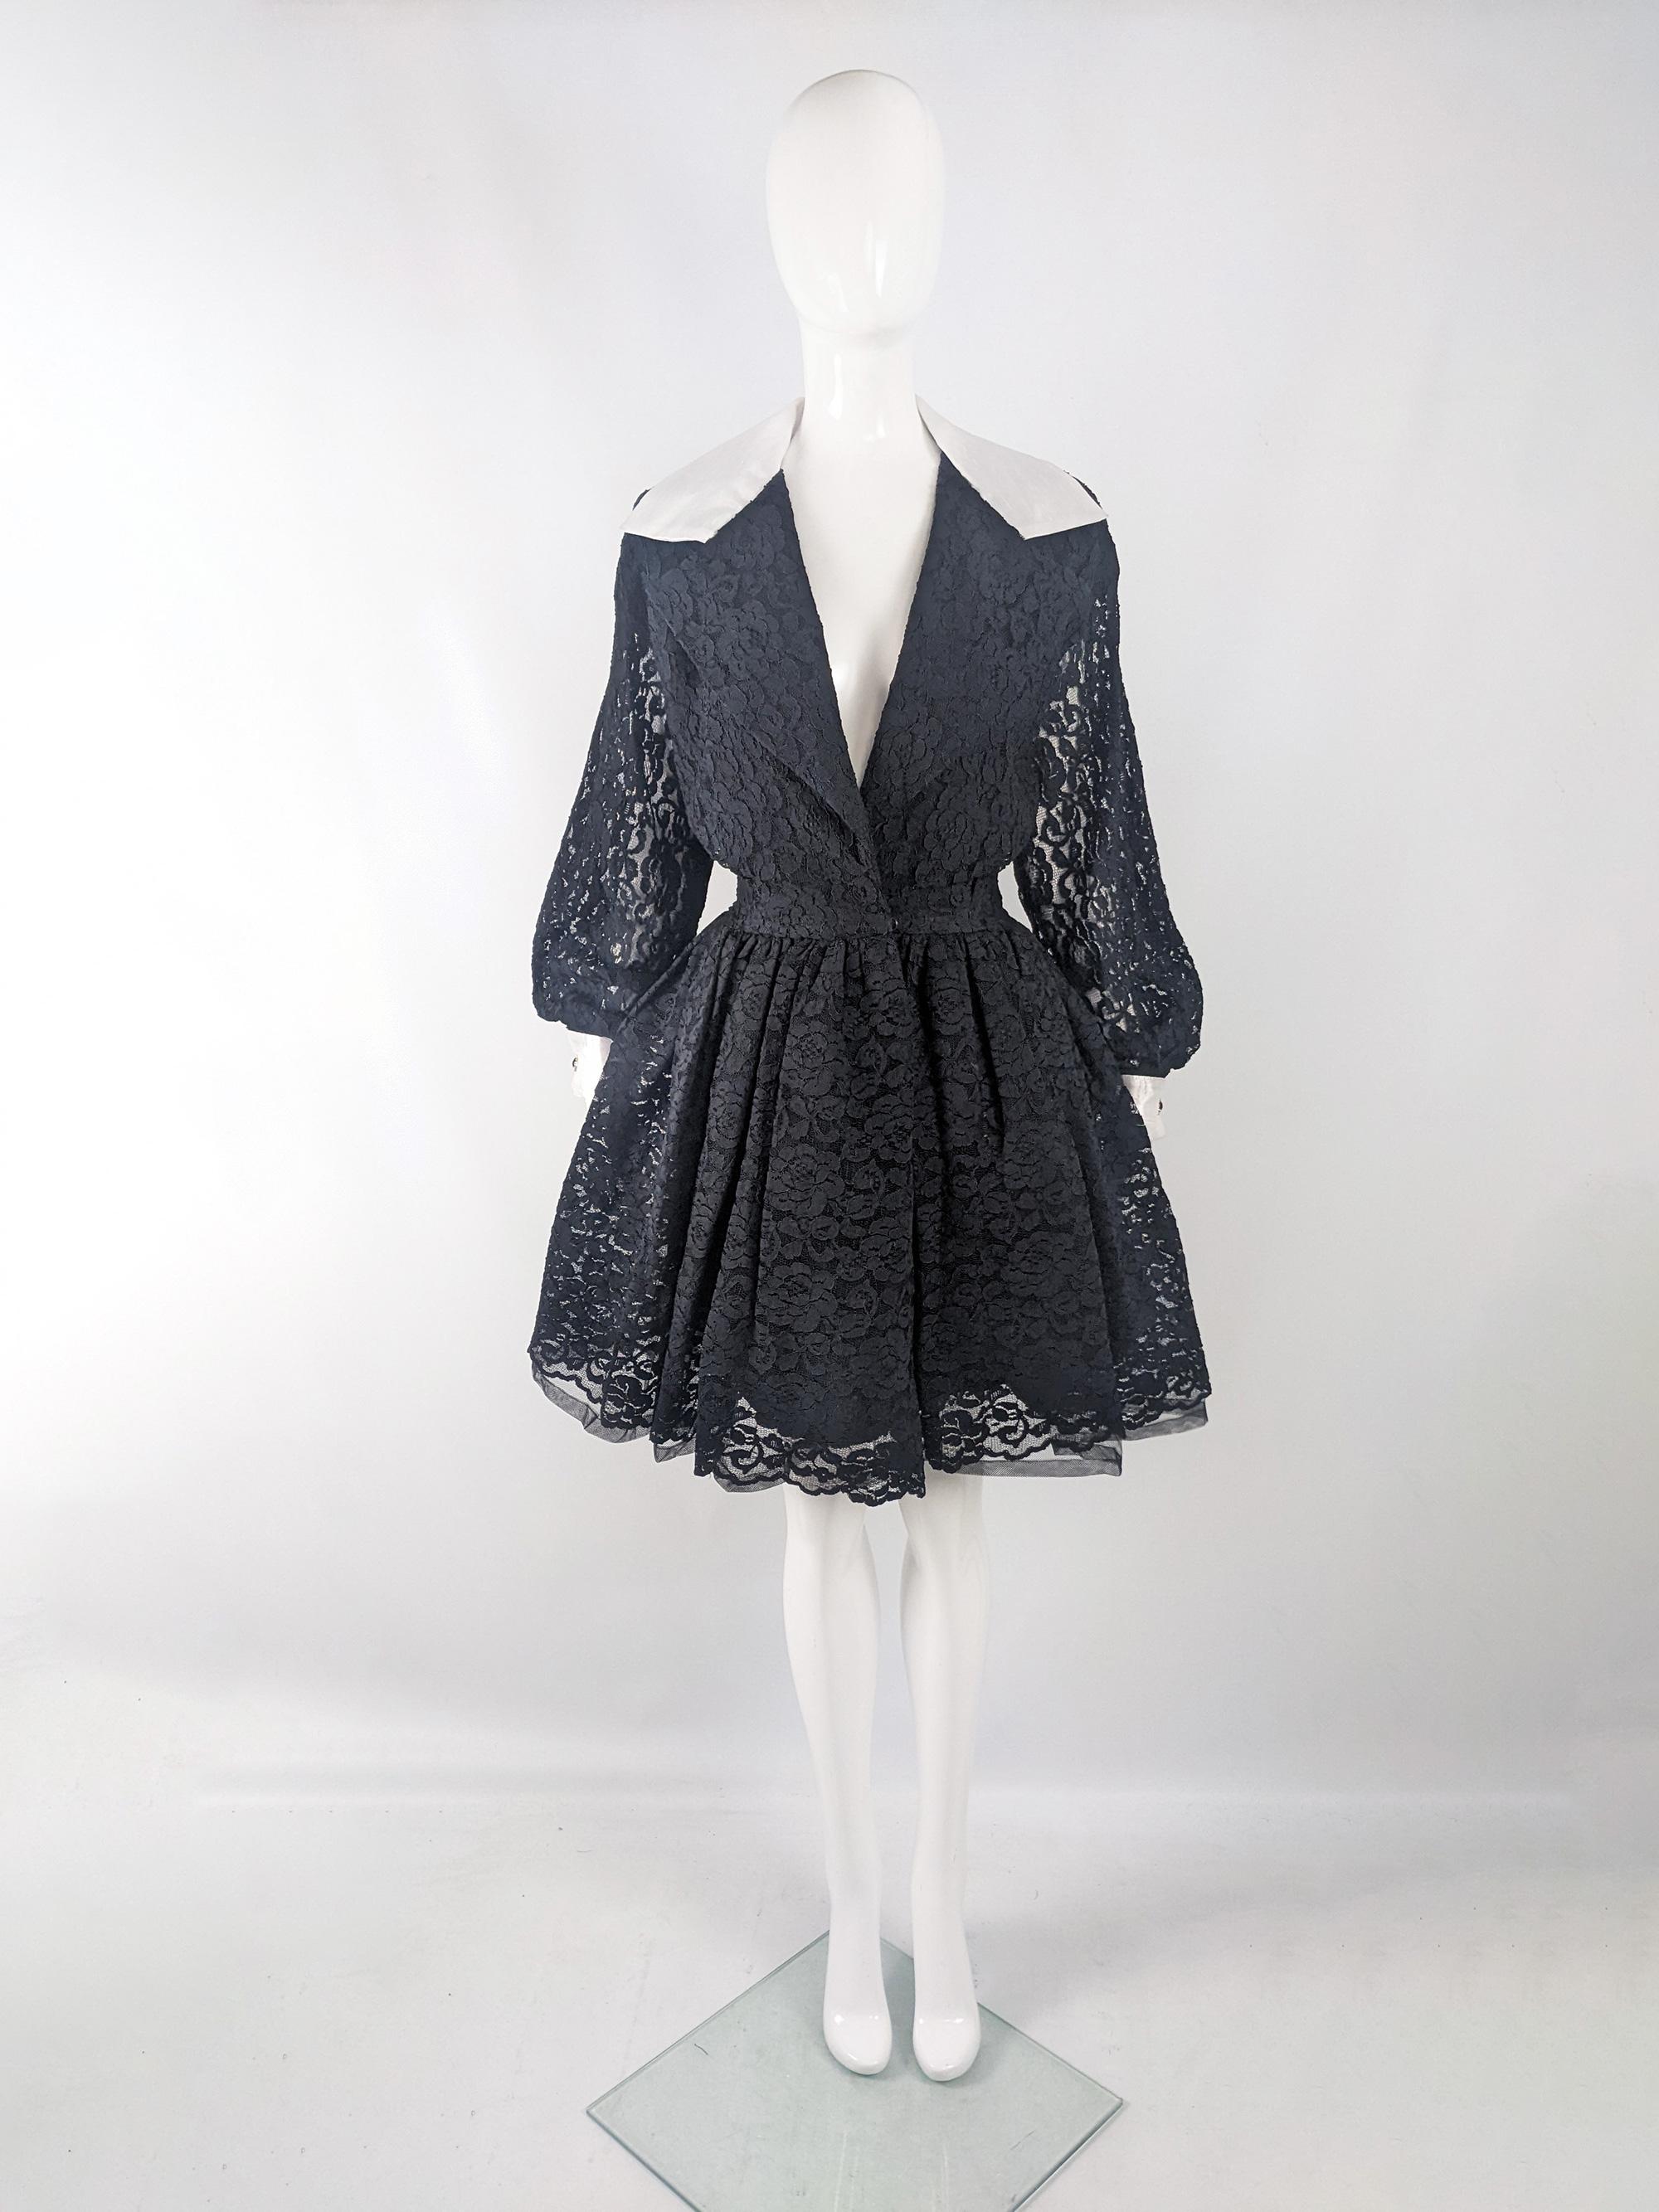 A glamorous vintage womens dress from the 80s by luxury American designer, Huey Waltzer. In a black lace with sheer bishop sleeves, a deep neck and a fantastic silhouette that is slightly loose and blouson on the bust, with a nipped waist and a